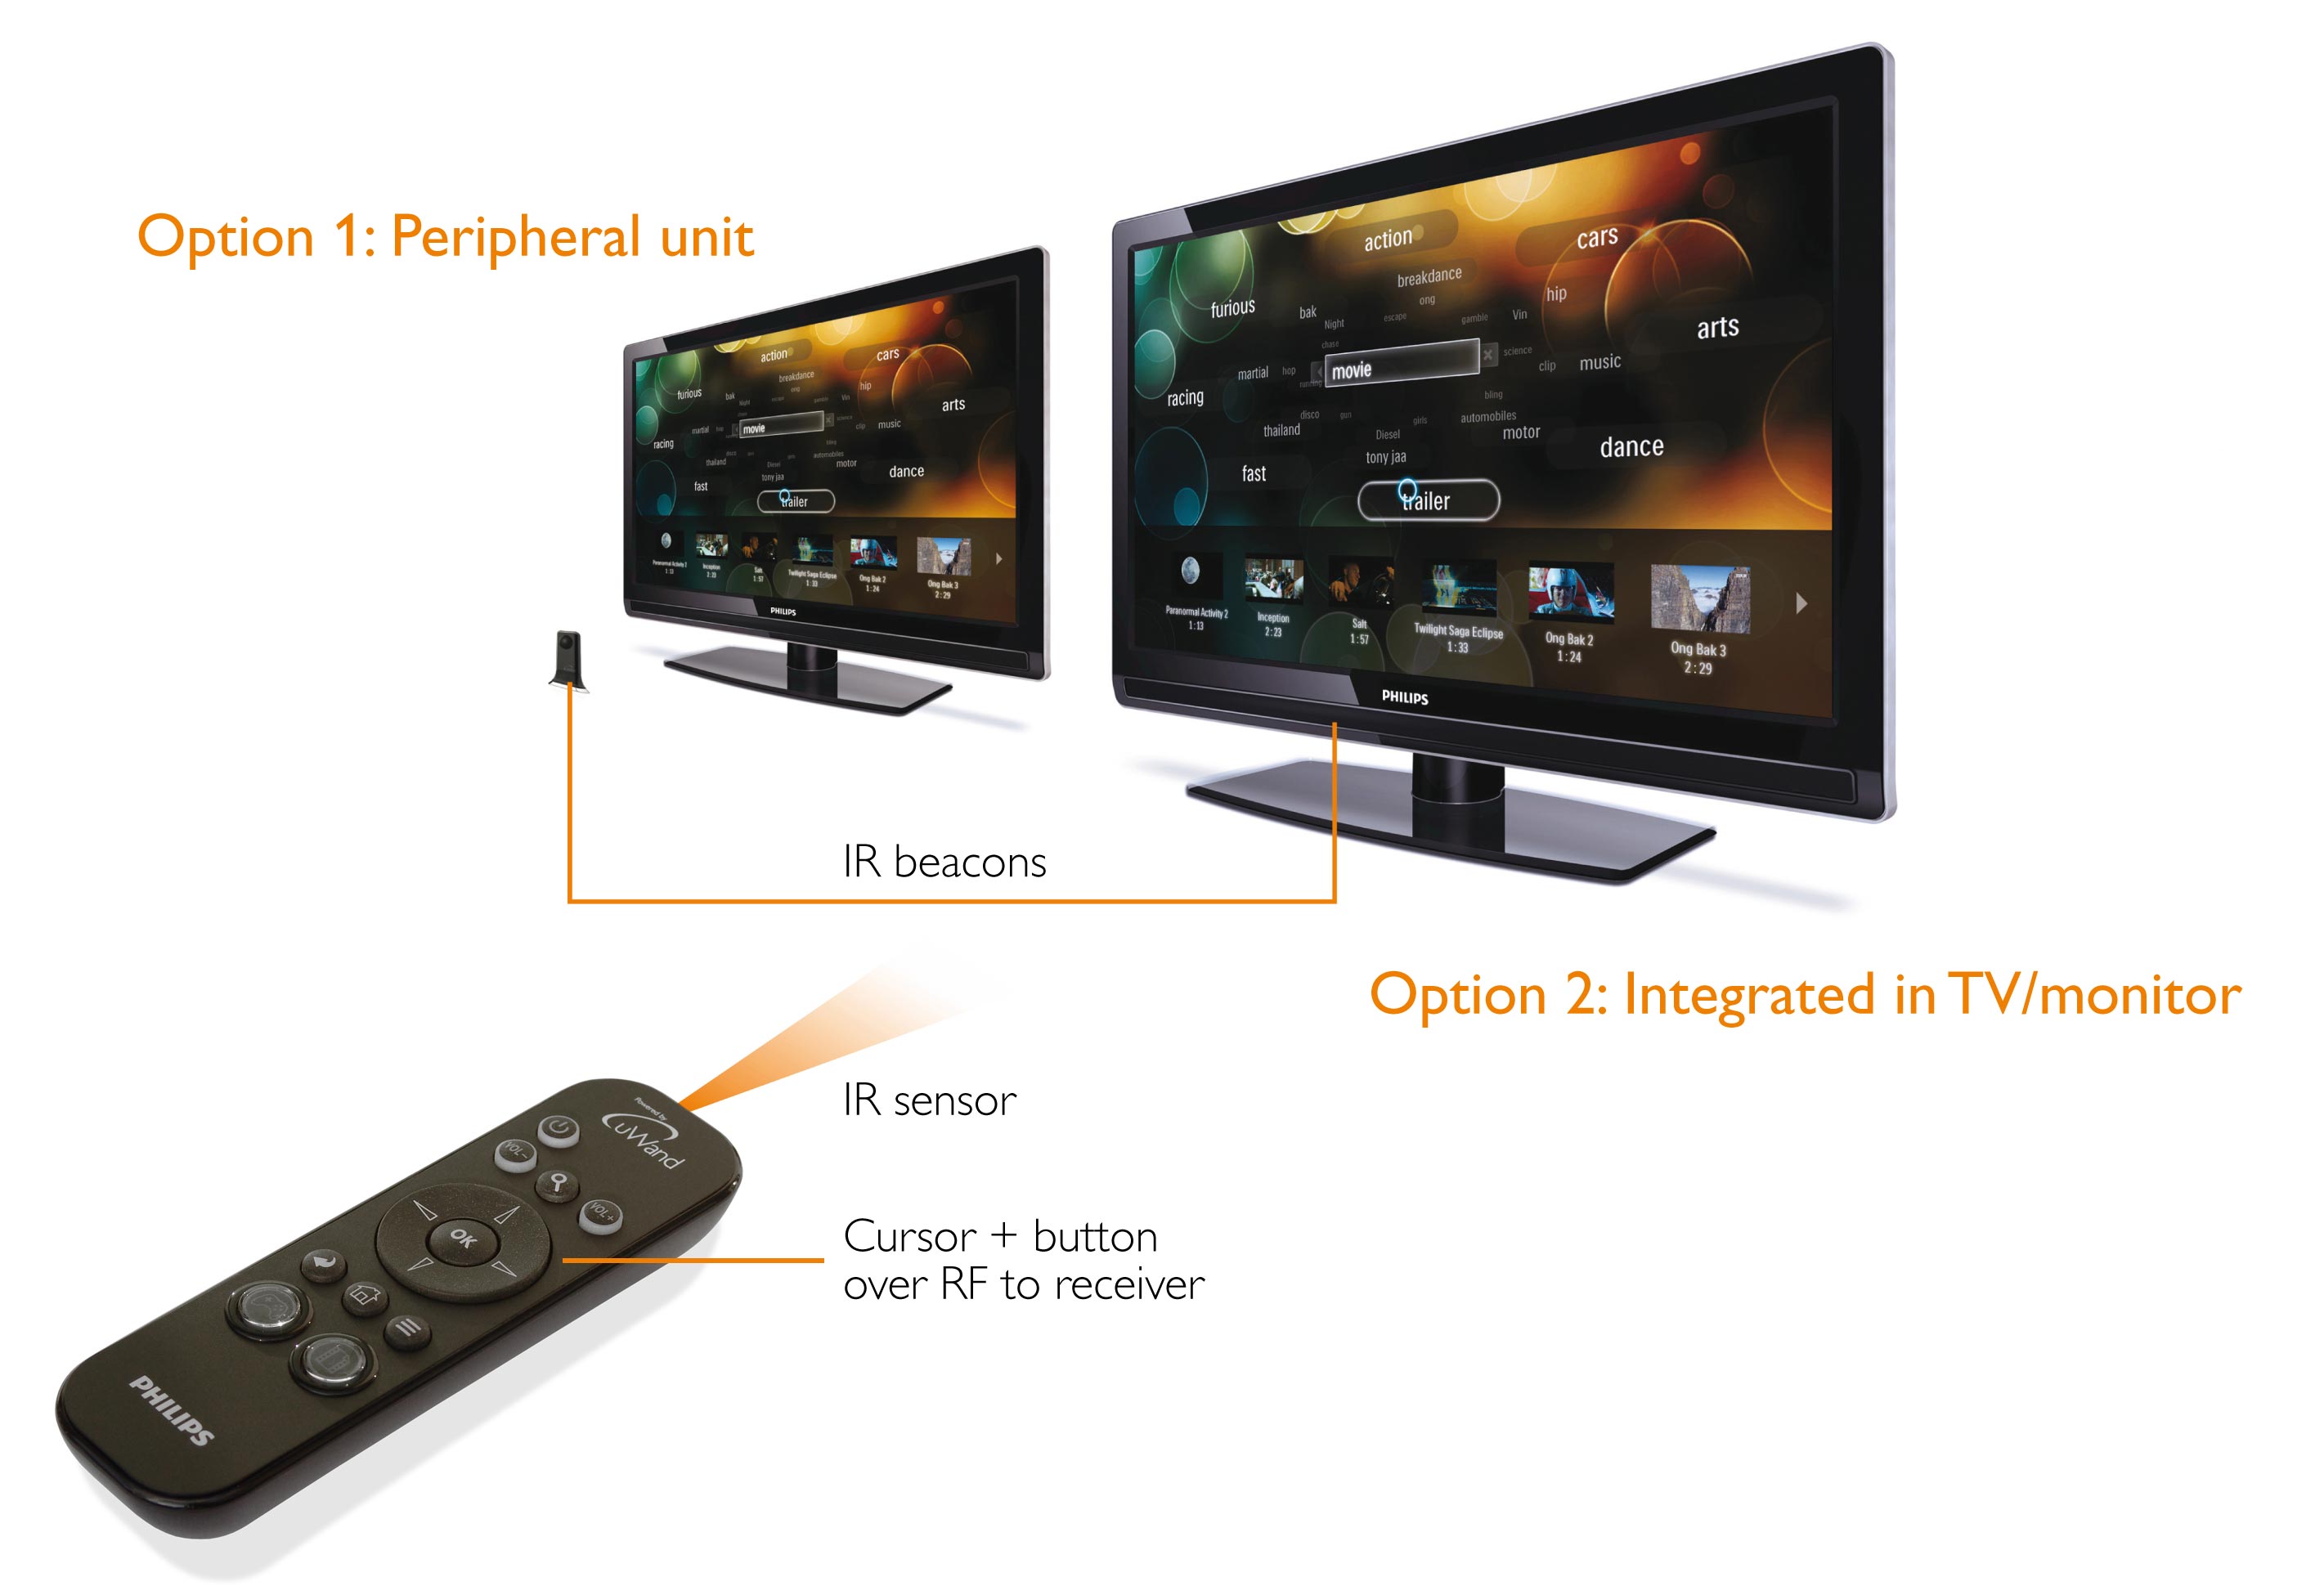 uWand options with new remote